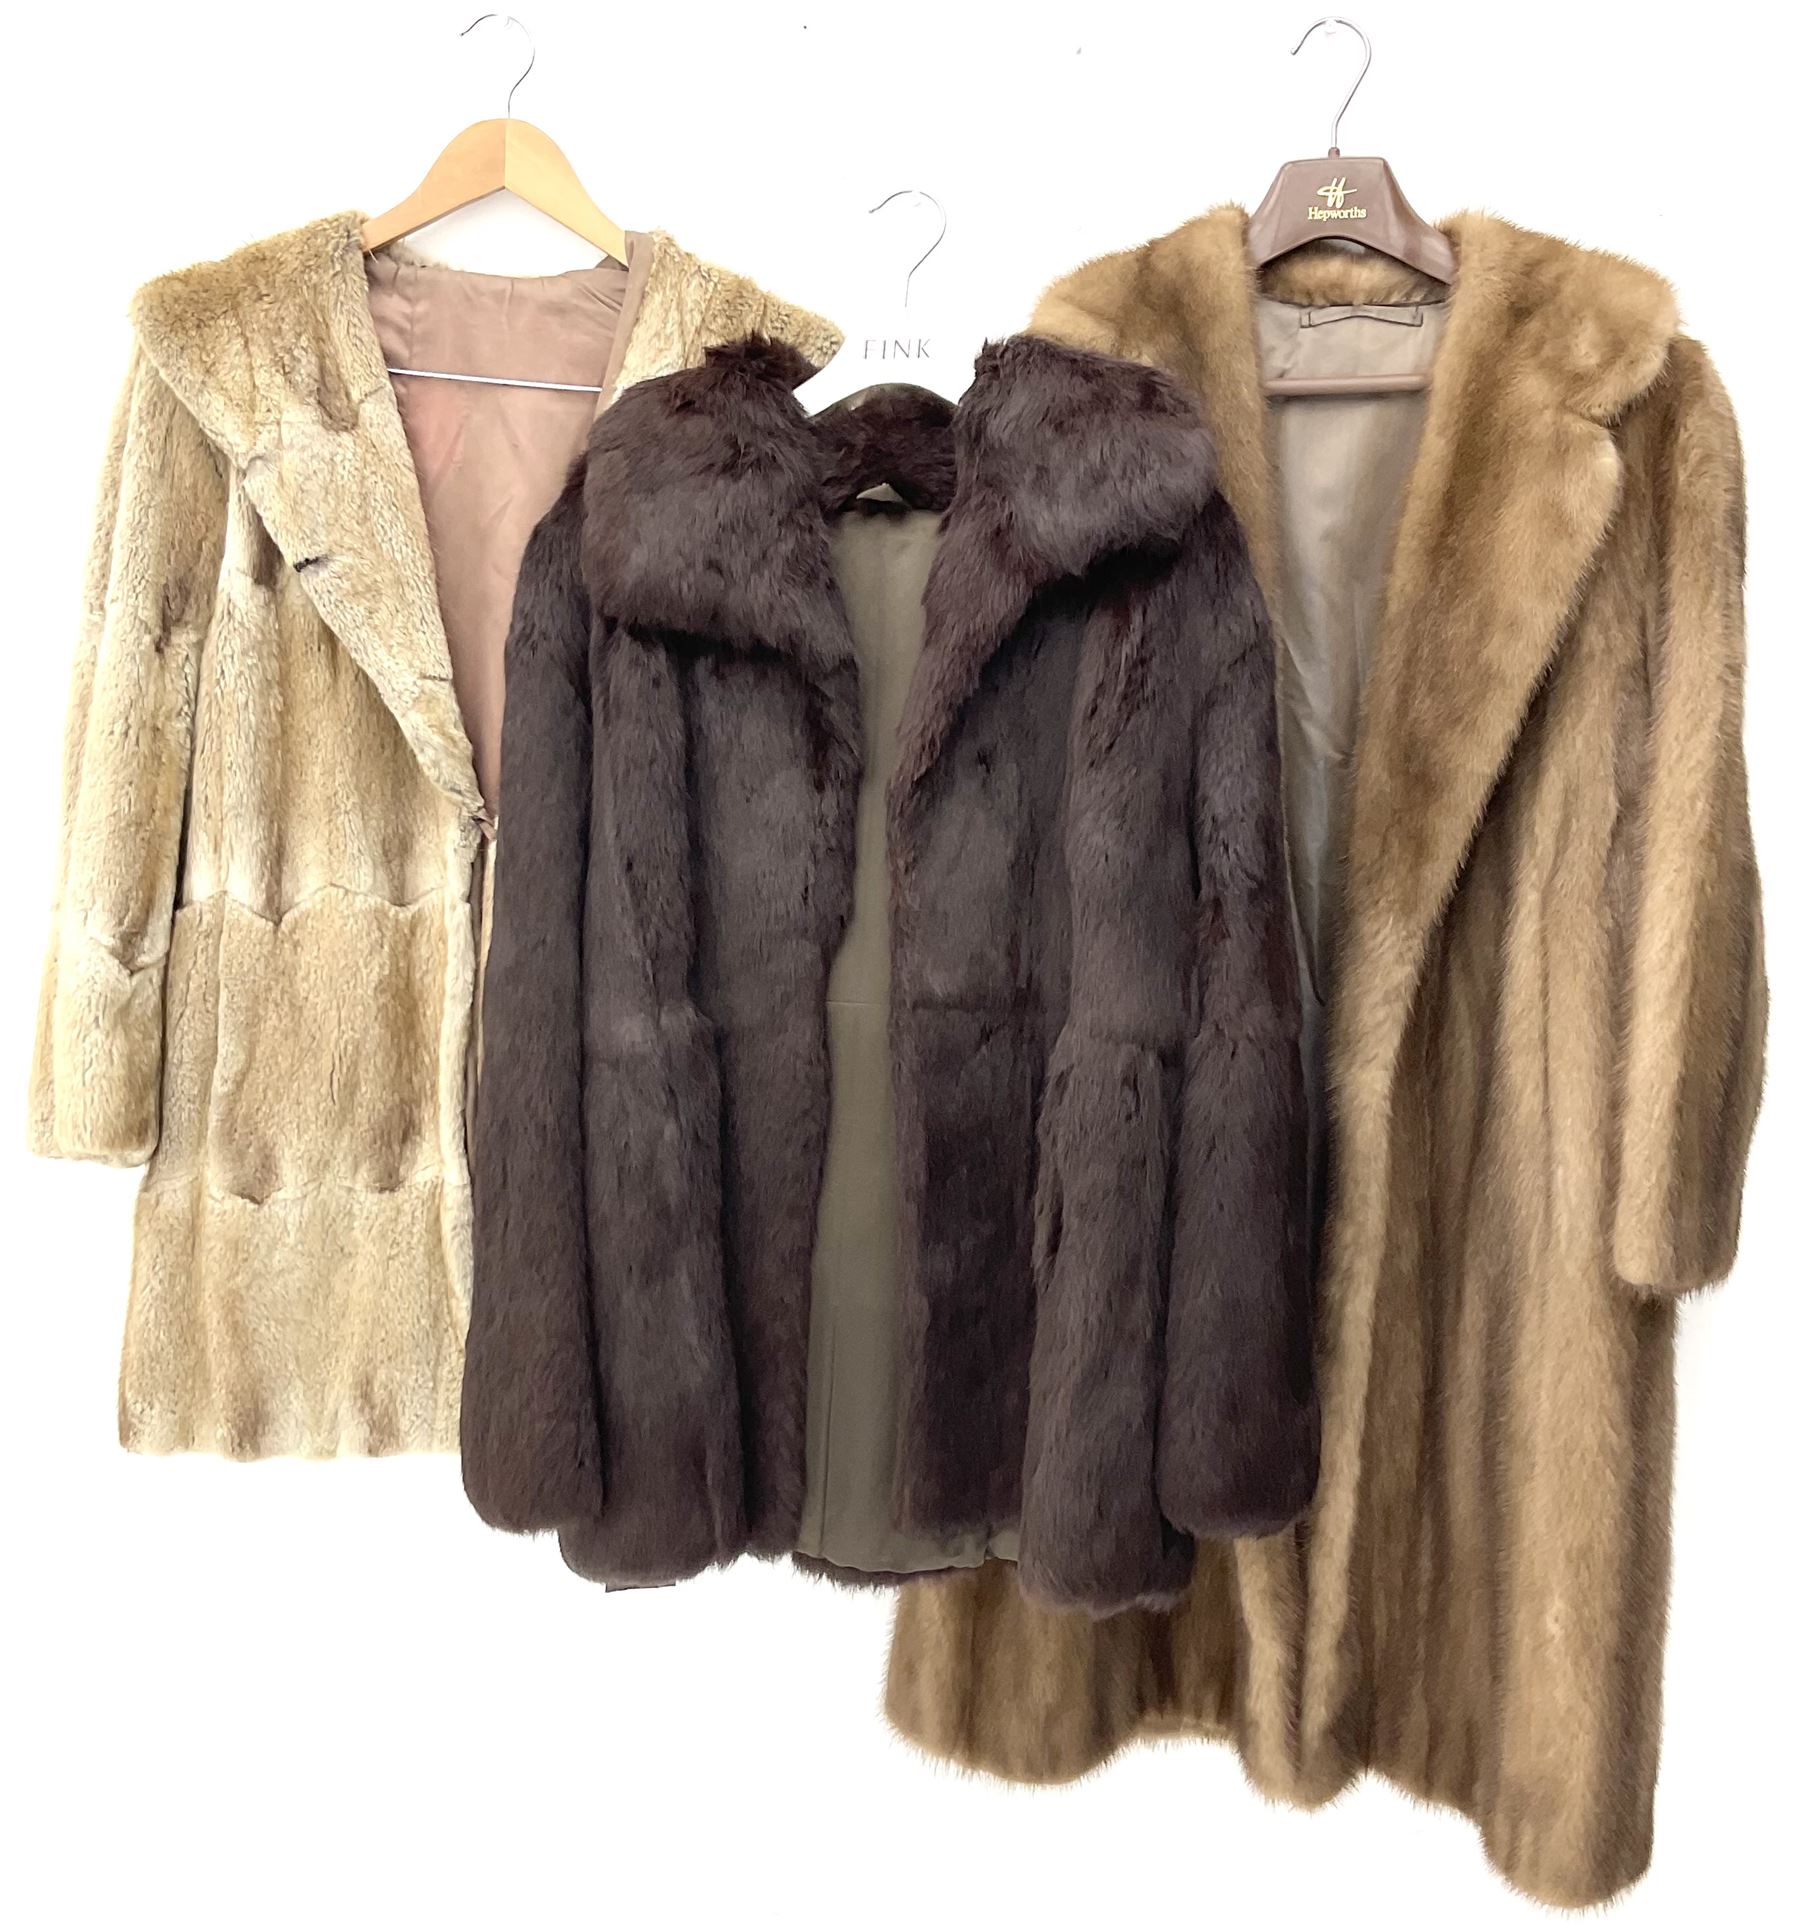 Ladies full length light brown mink fur coat, together with a